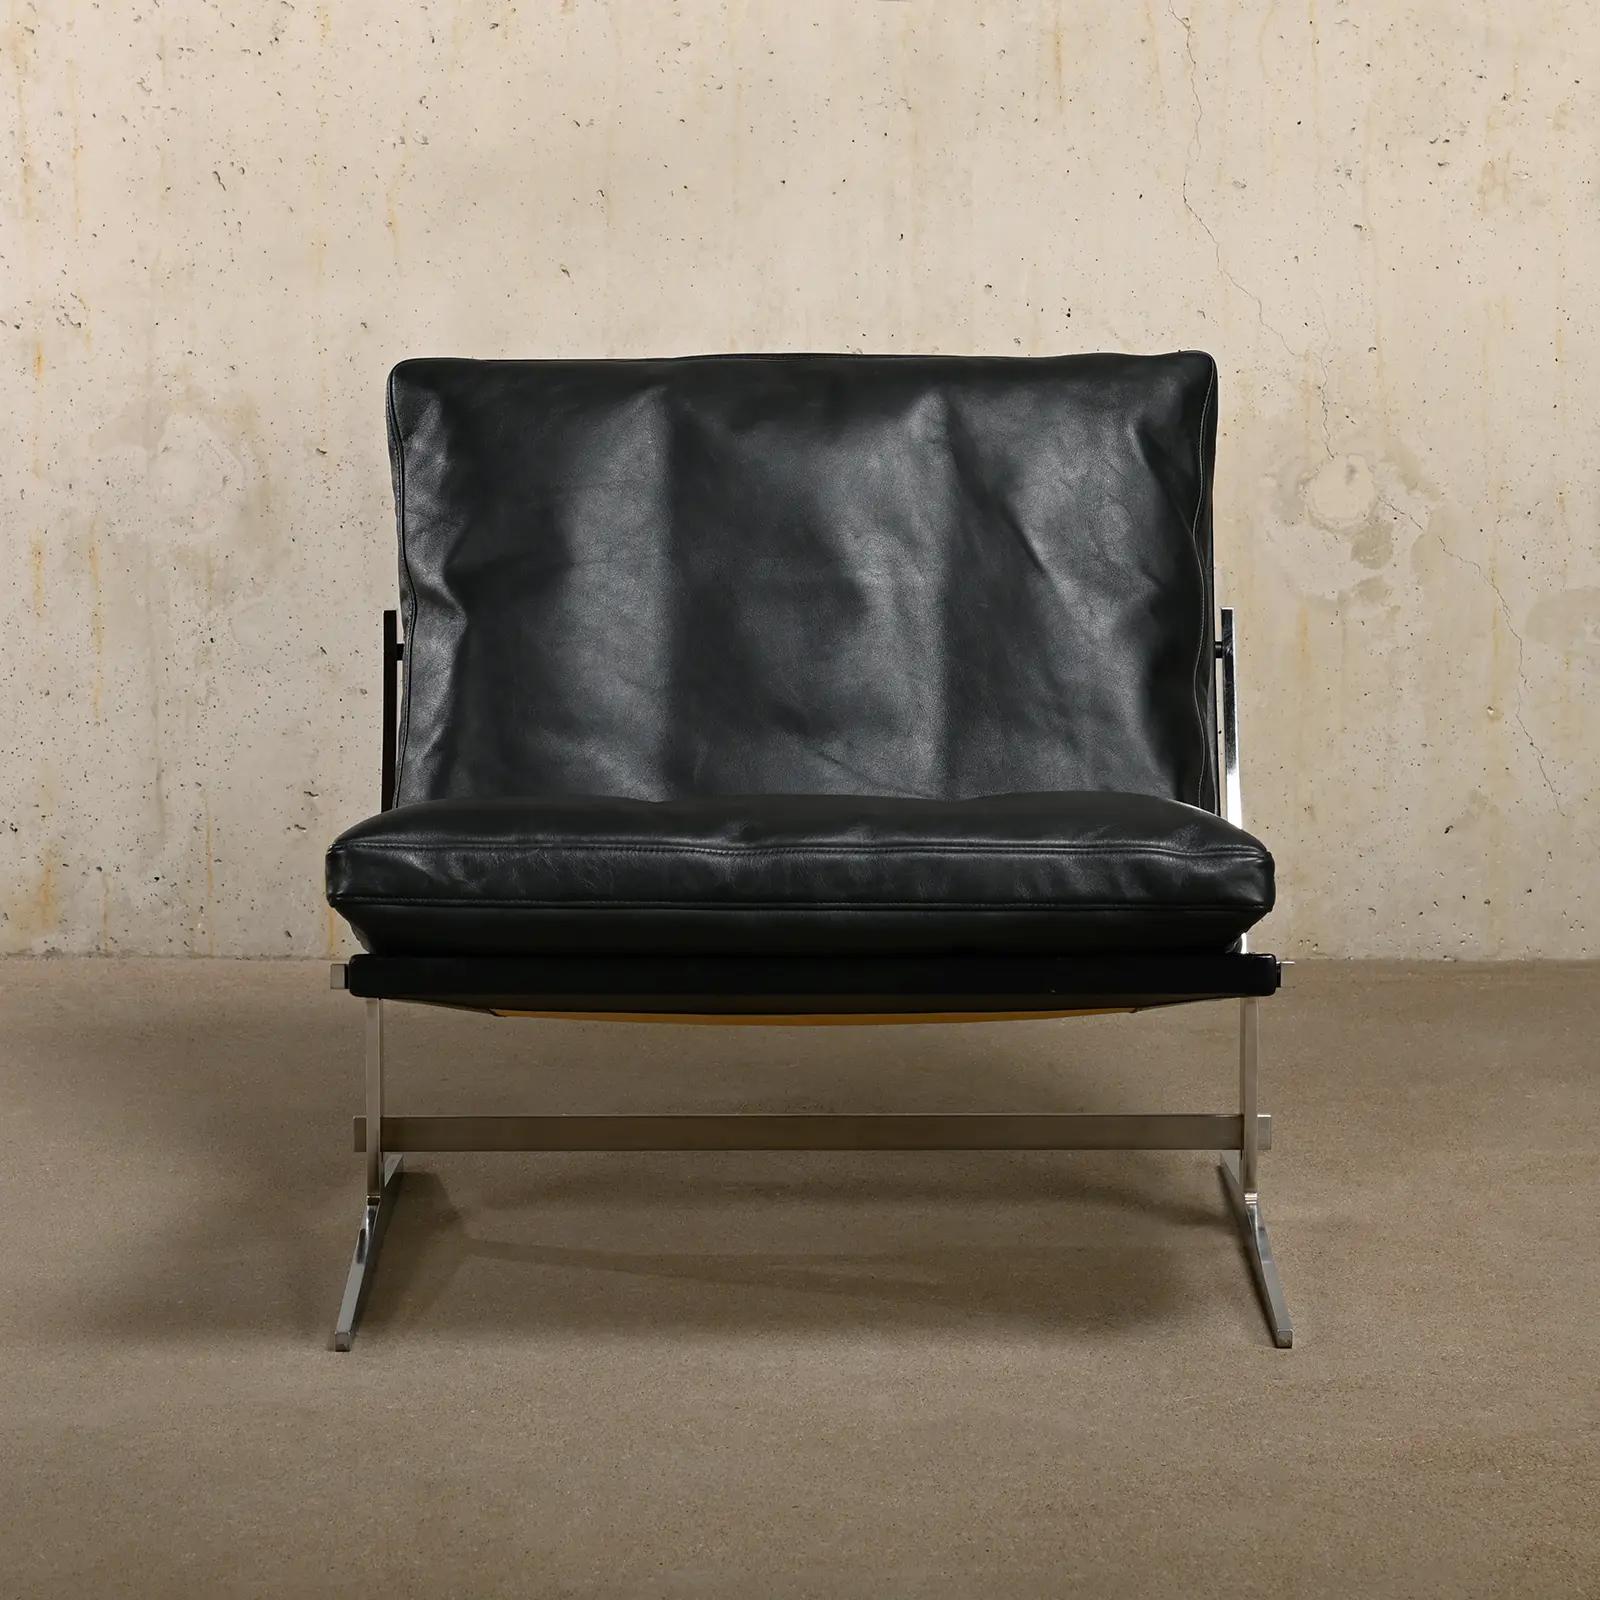 Steel Kastholm & Fabricius BO-561 Lounge Chair in Black Leather by Bo-Ex, Denmark